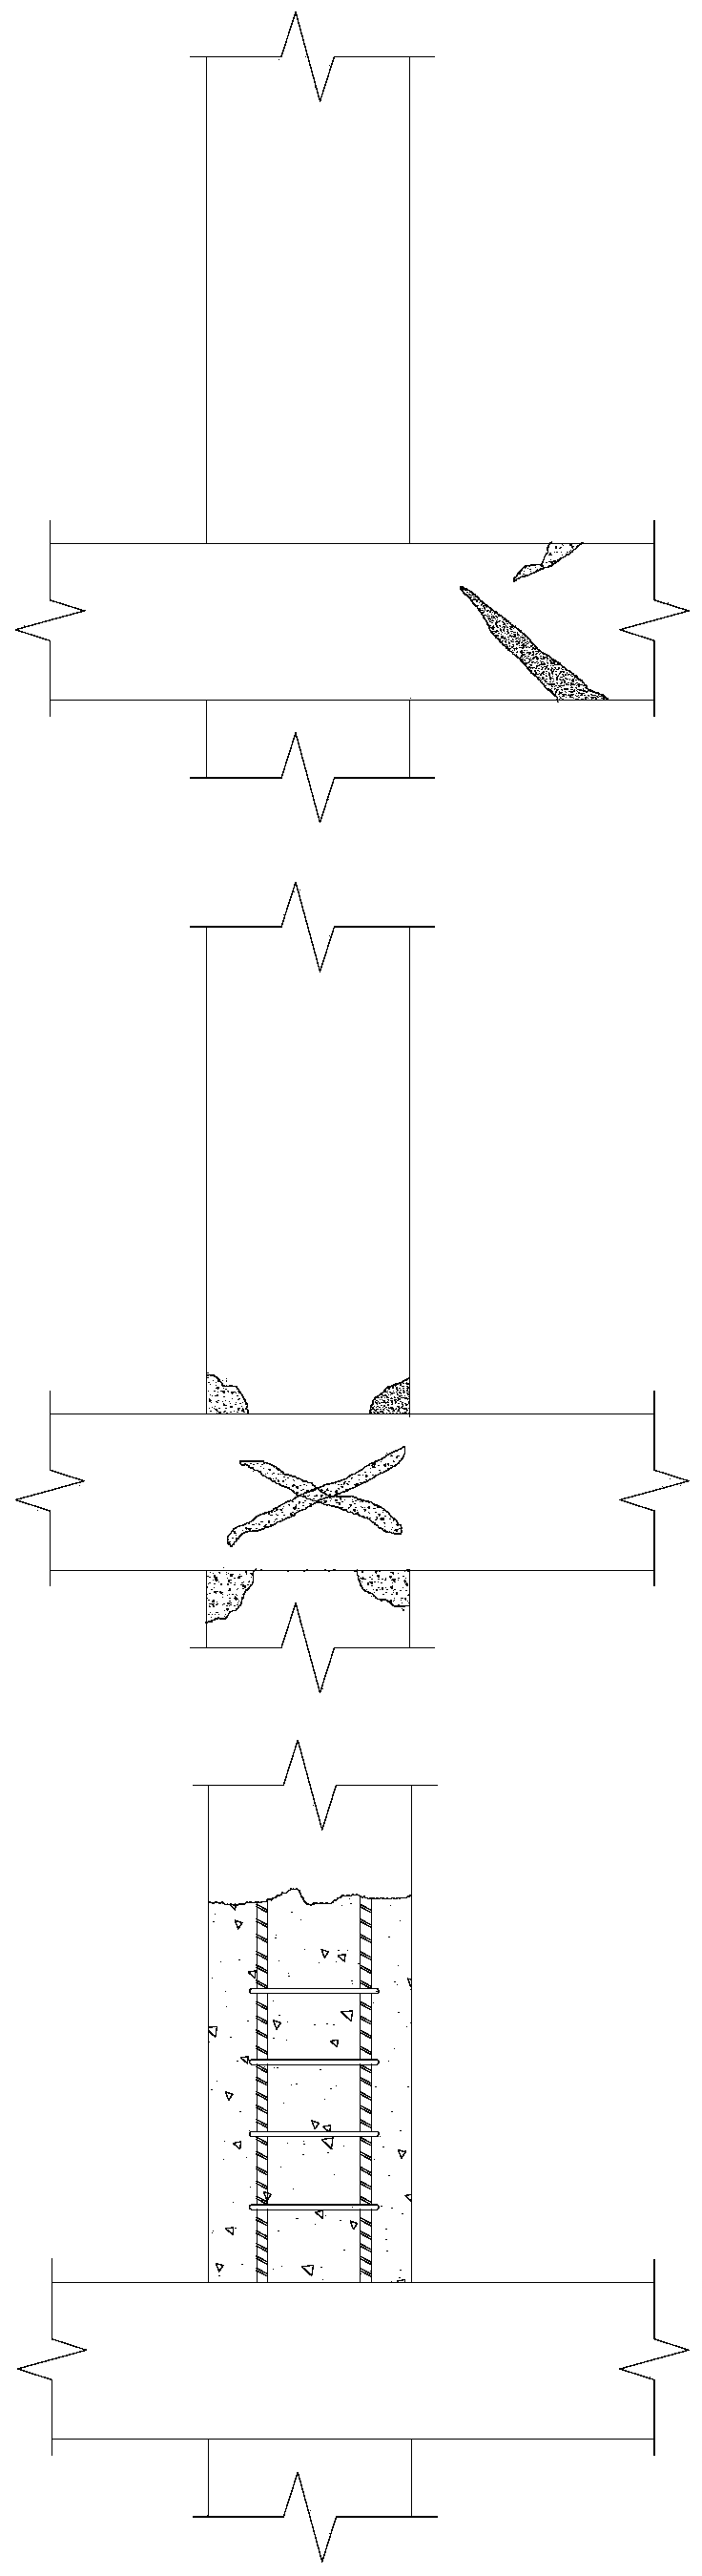 Construction Method of Self-resetting Concrete Frame with Enlarging Section and Reinforcing Earthquake-damaged Columns